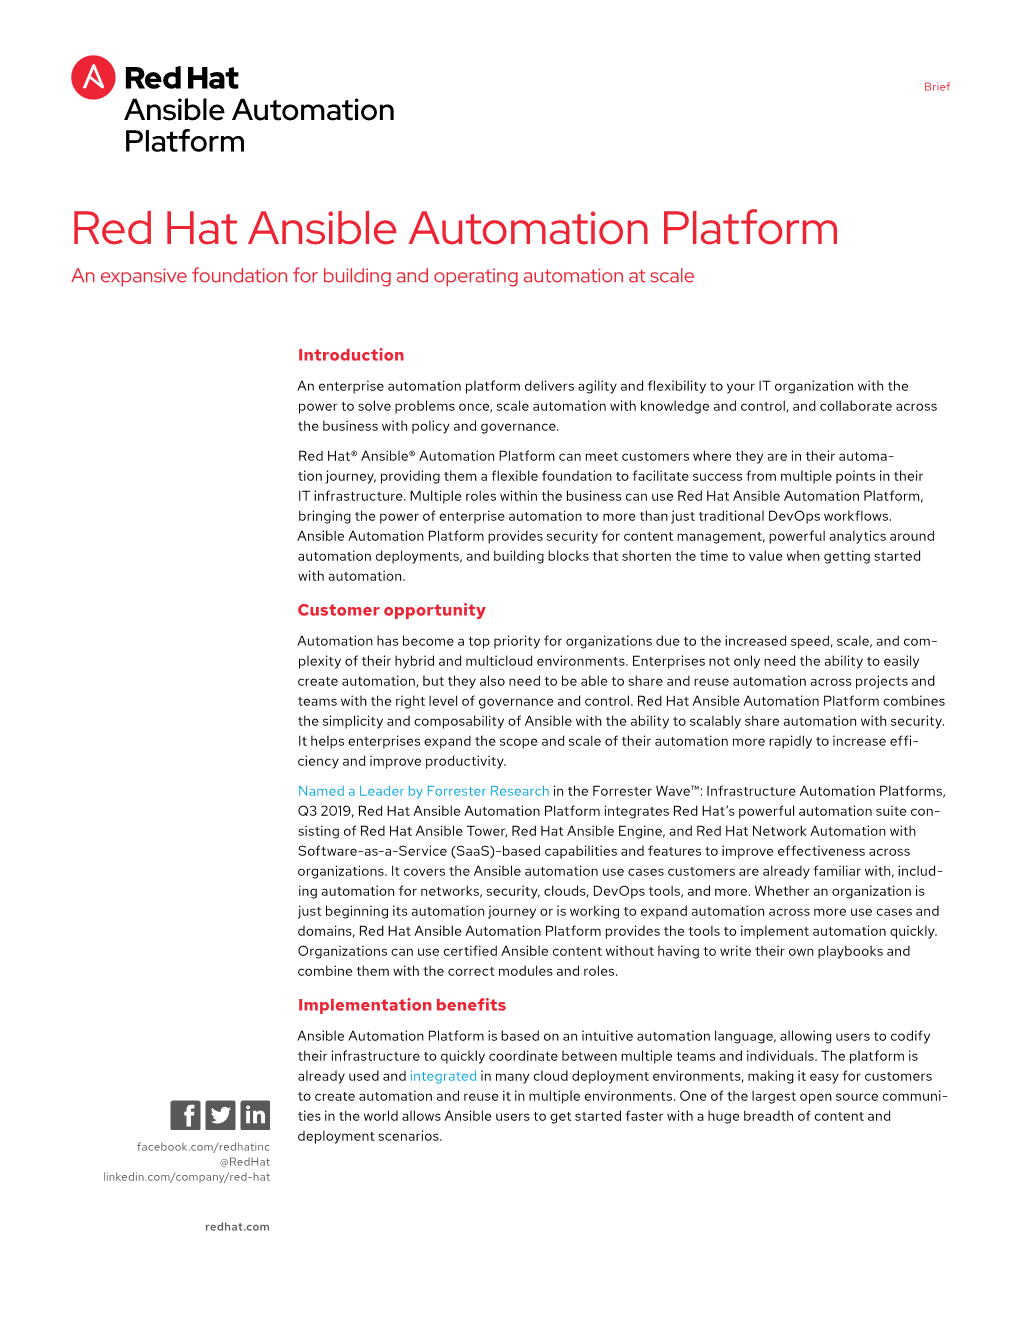 Red Hat Ansible Automation Platform Brief